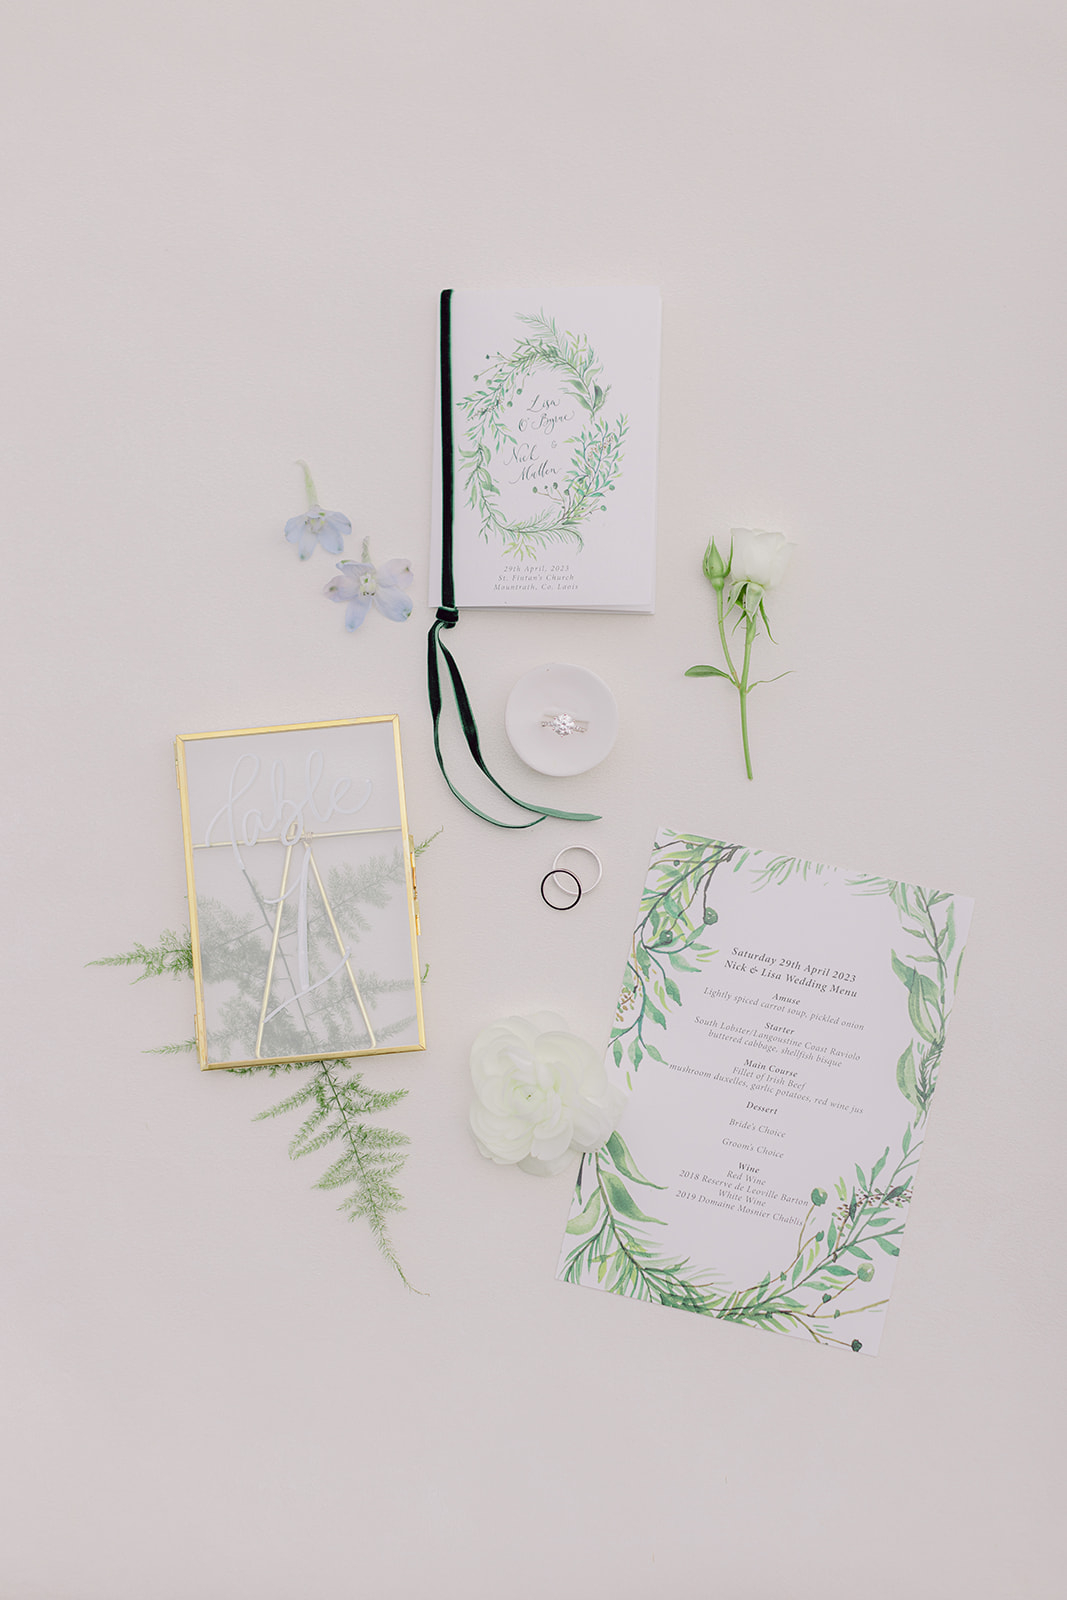 A selection of stationary for a wedding at Ballyin Demesne.